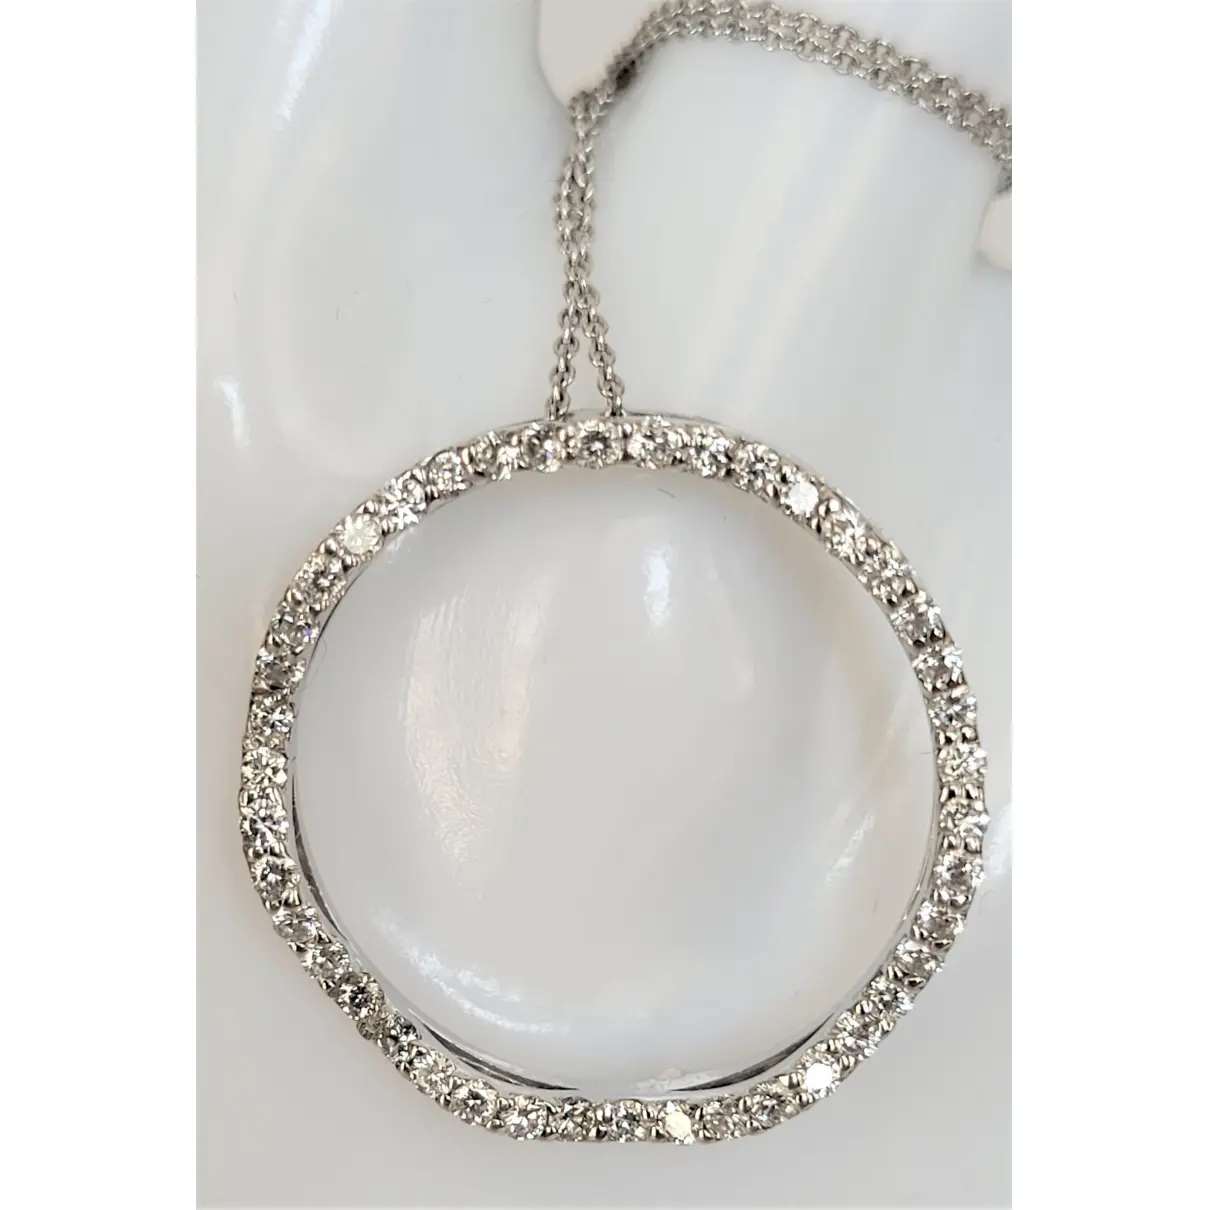 Buy Roberto Coin White gold necklace online